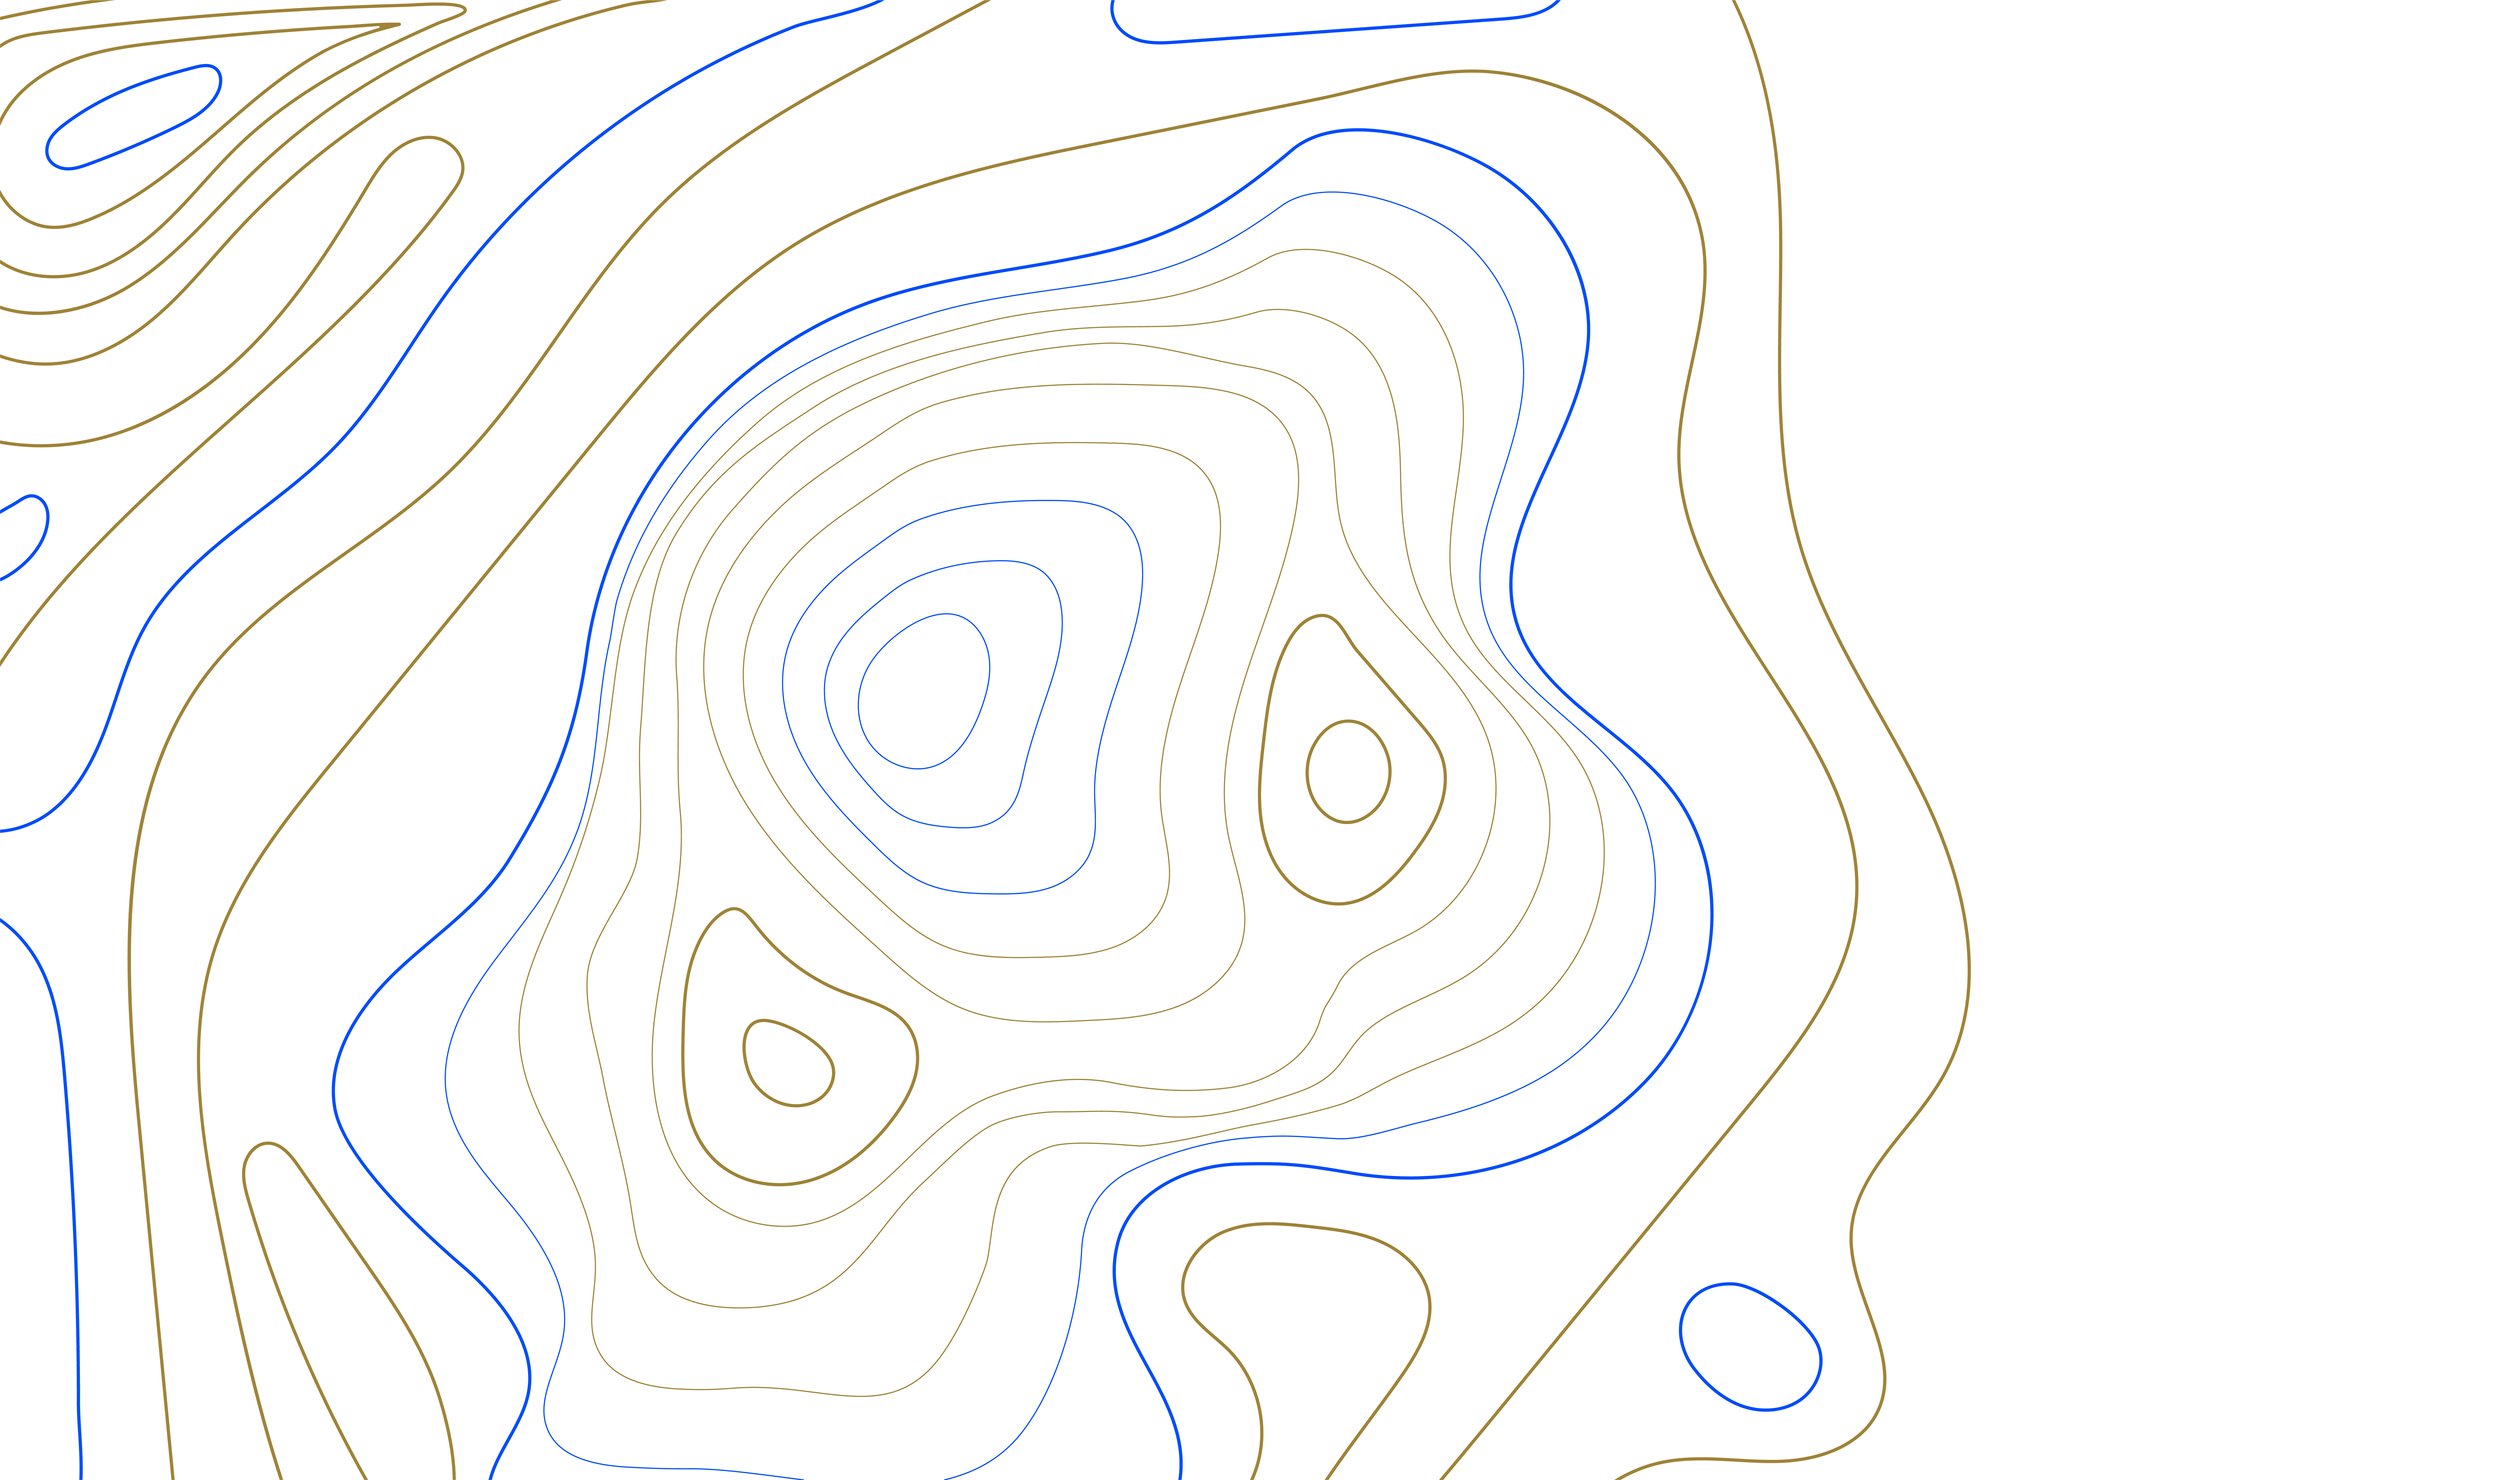 TopographicPattern-SourceFile_Topographic pattern-2 color.jpg